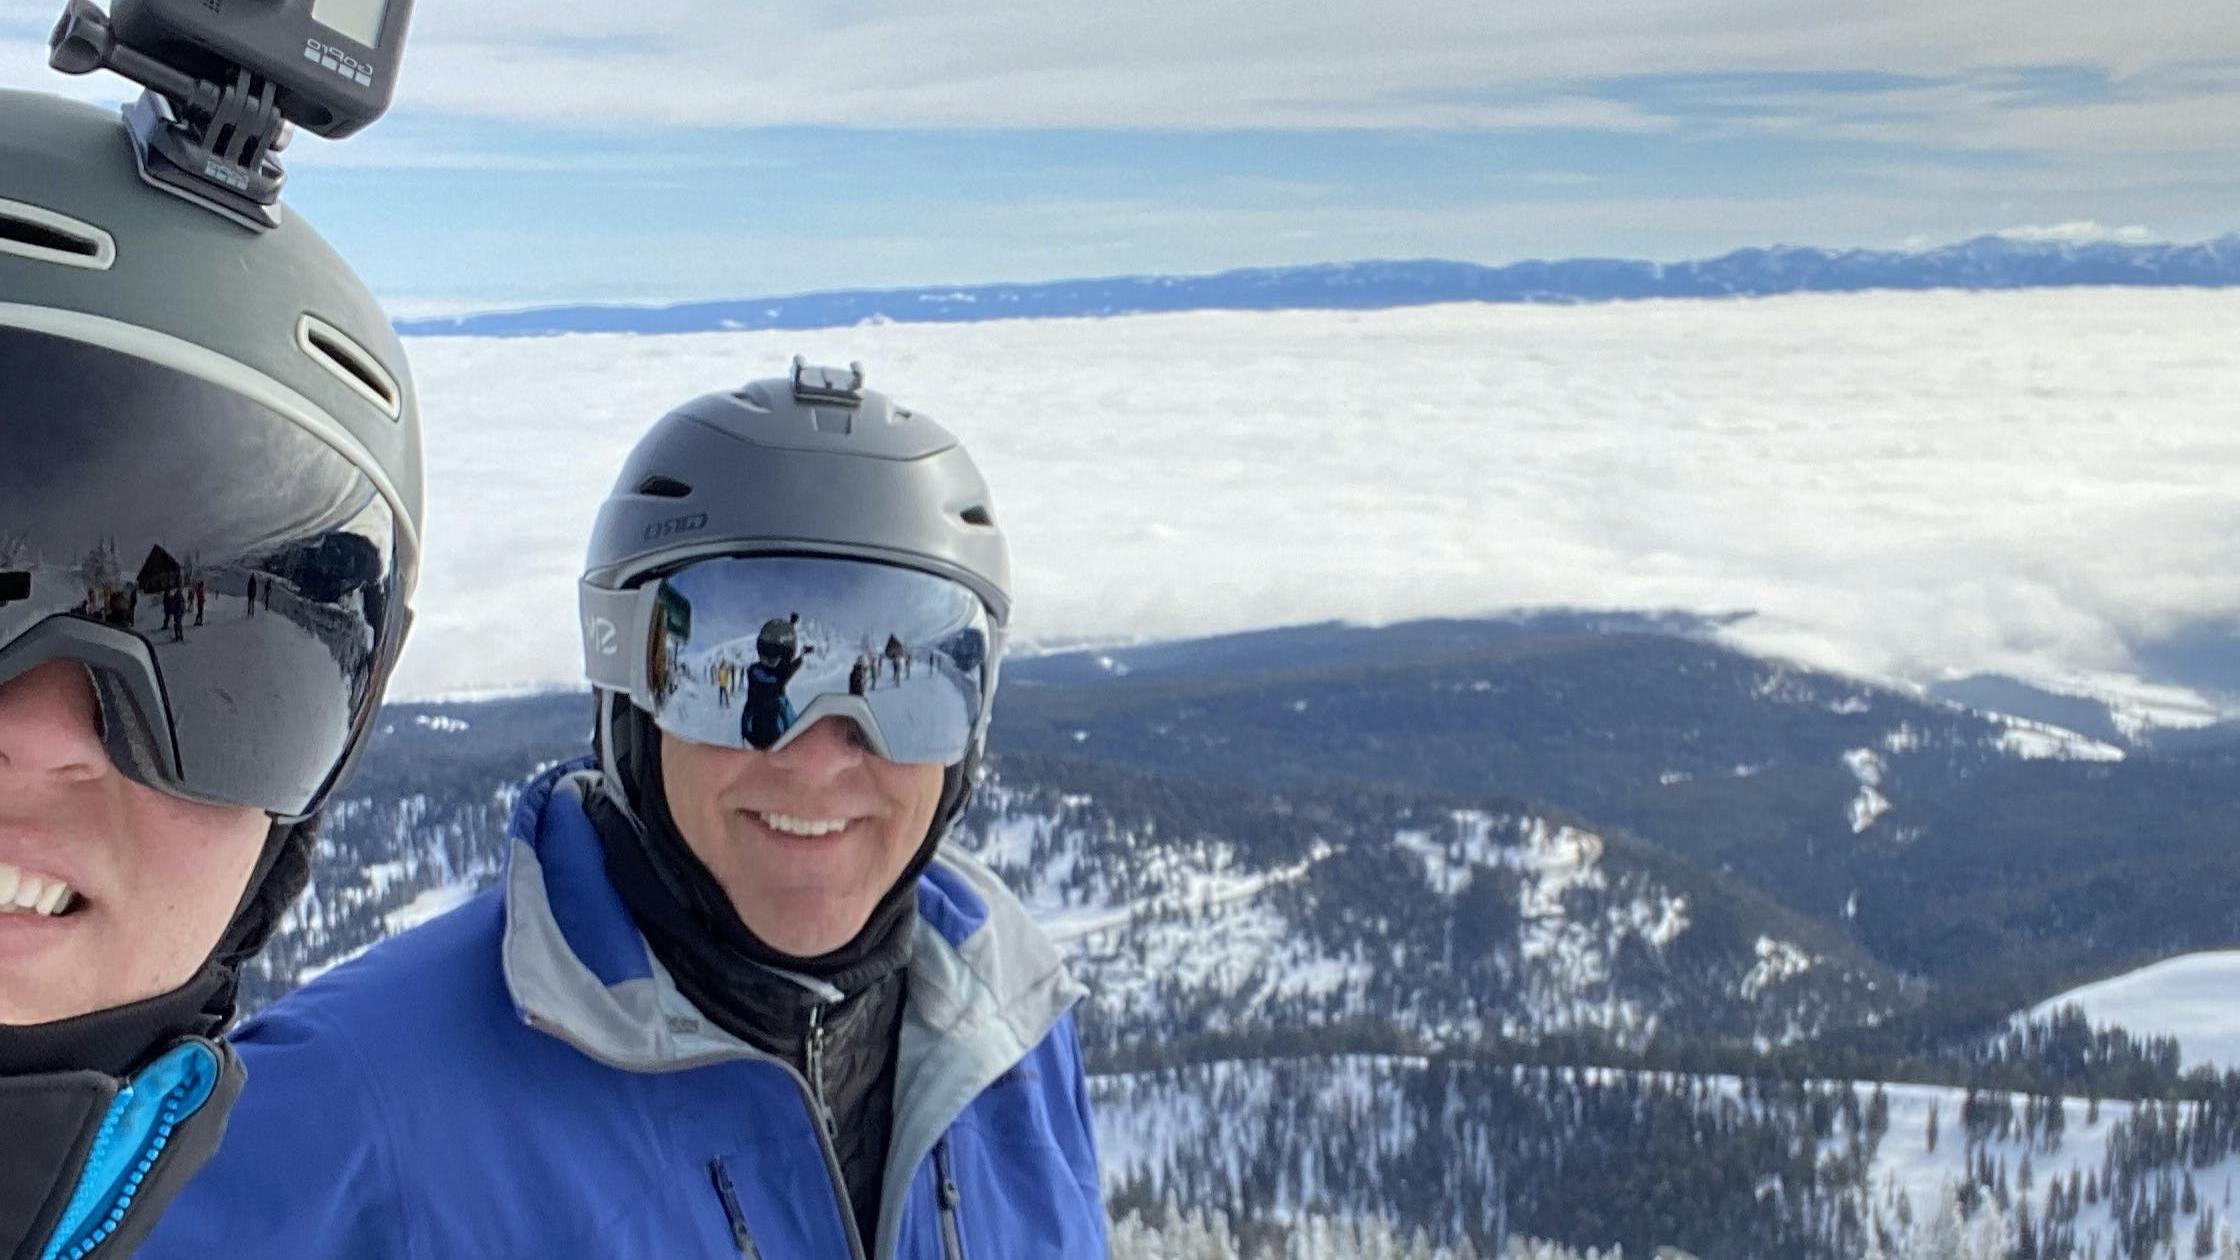 The author takes a selfie with his dad while they wear ski helmets.